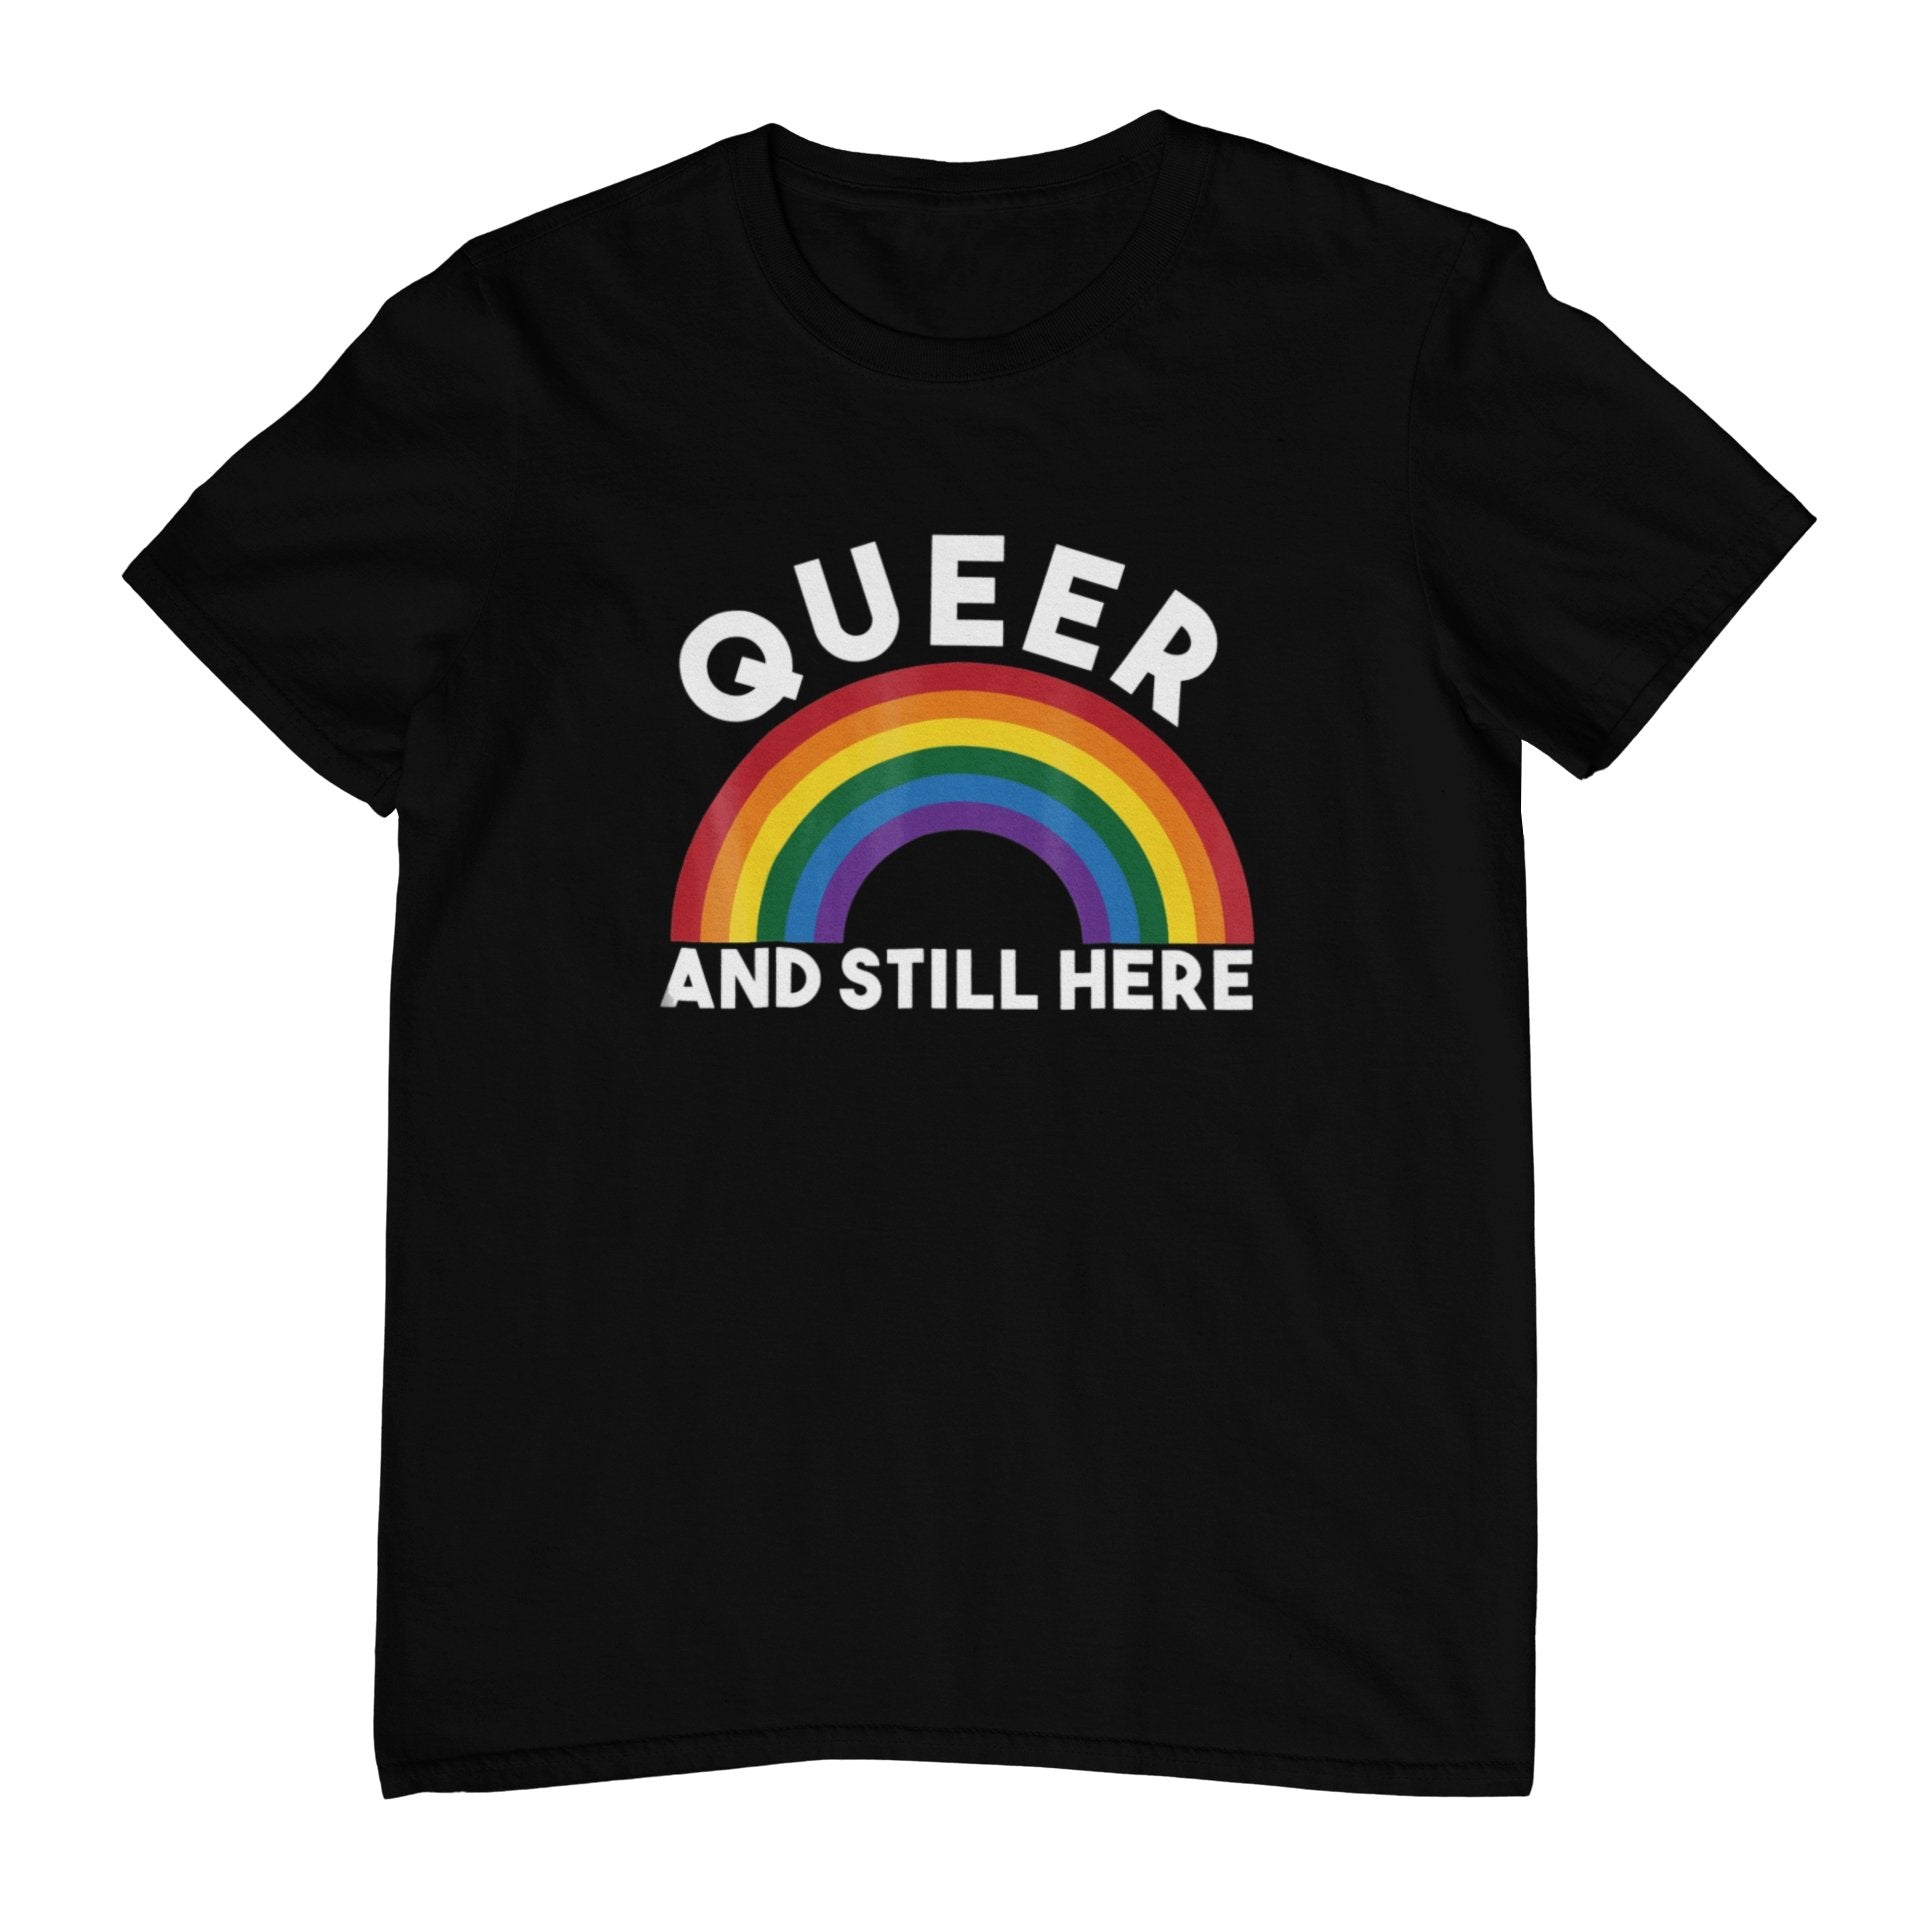 Queer and still here T-Shirt